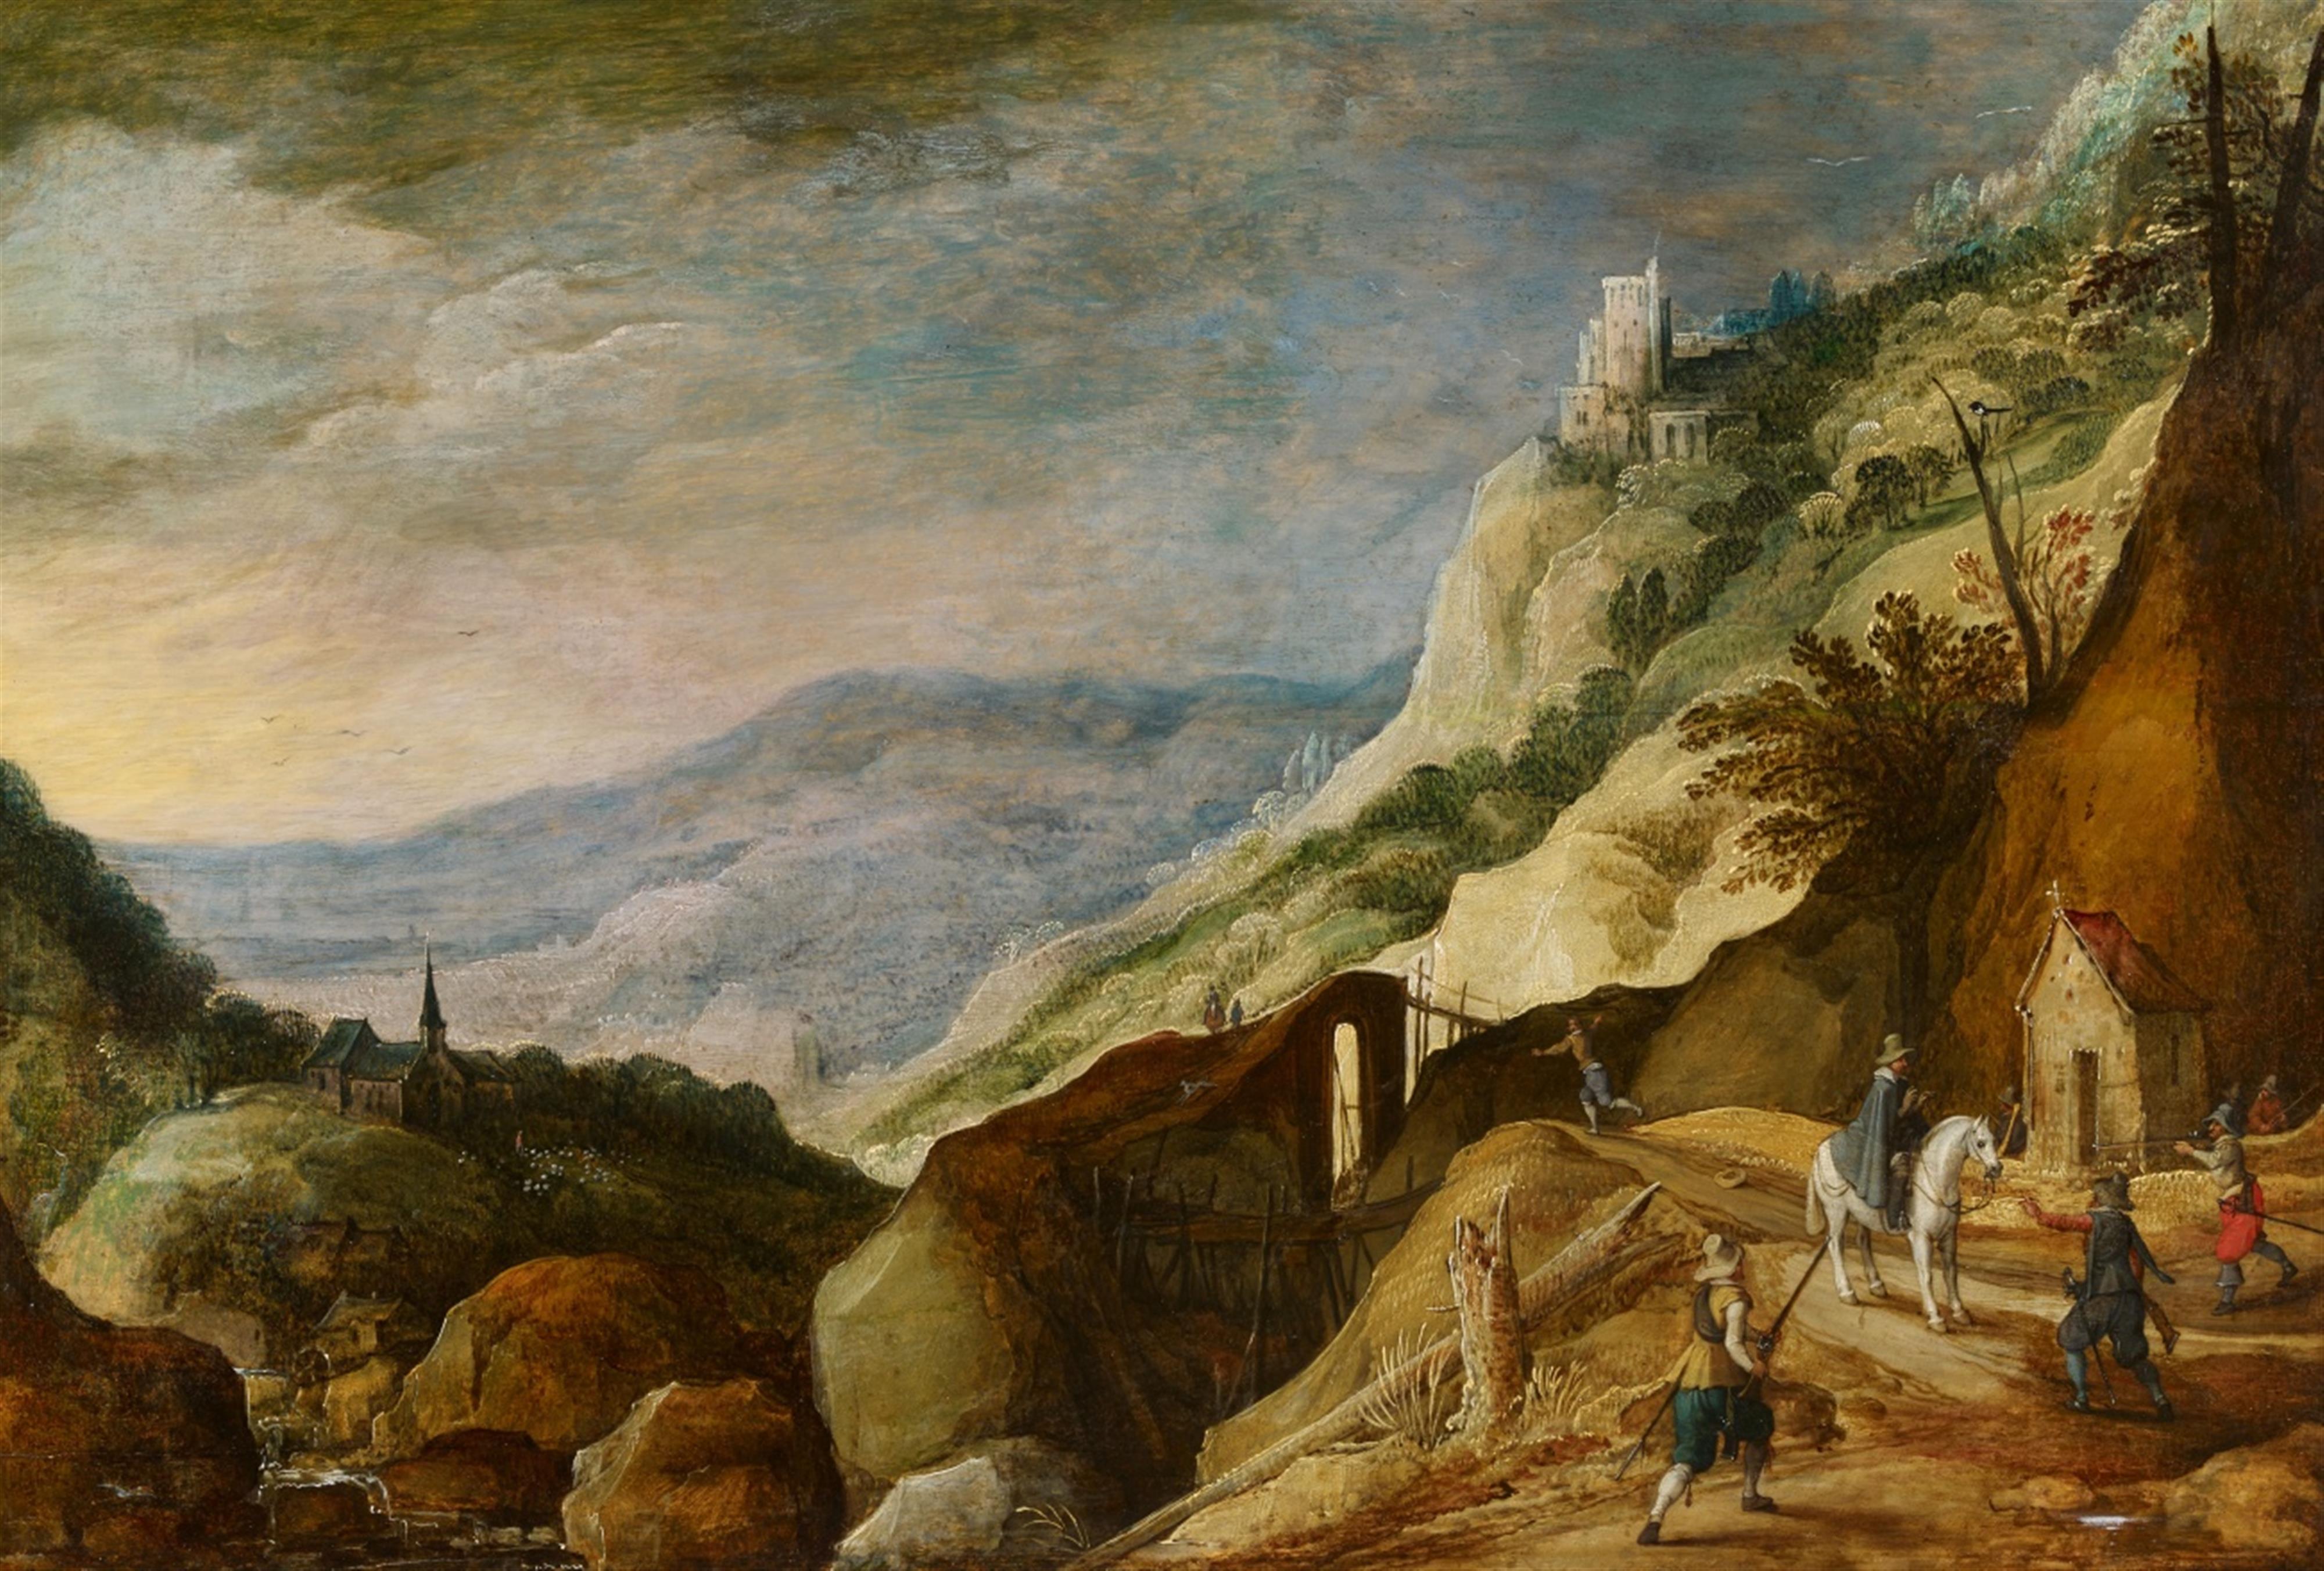 Joos de Momper - Mountainous Landscape with a Robbery - image-1